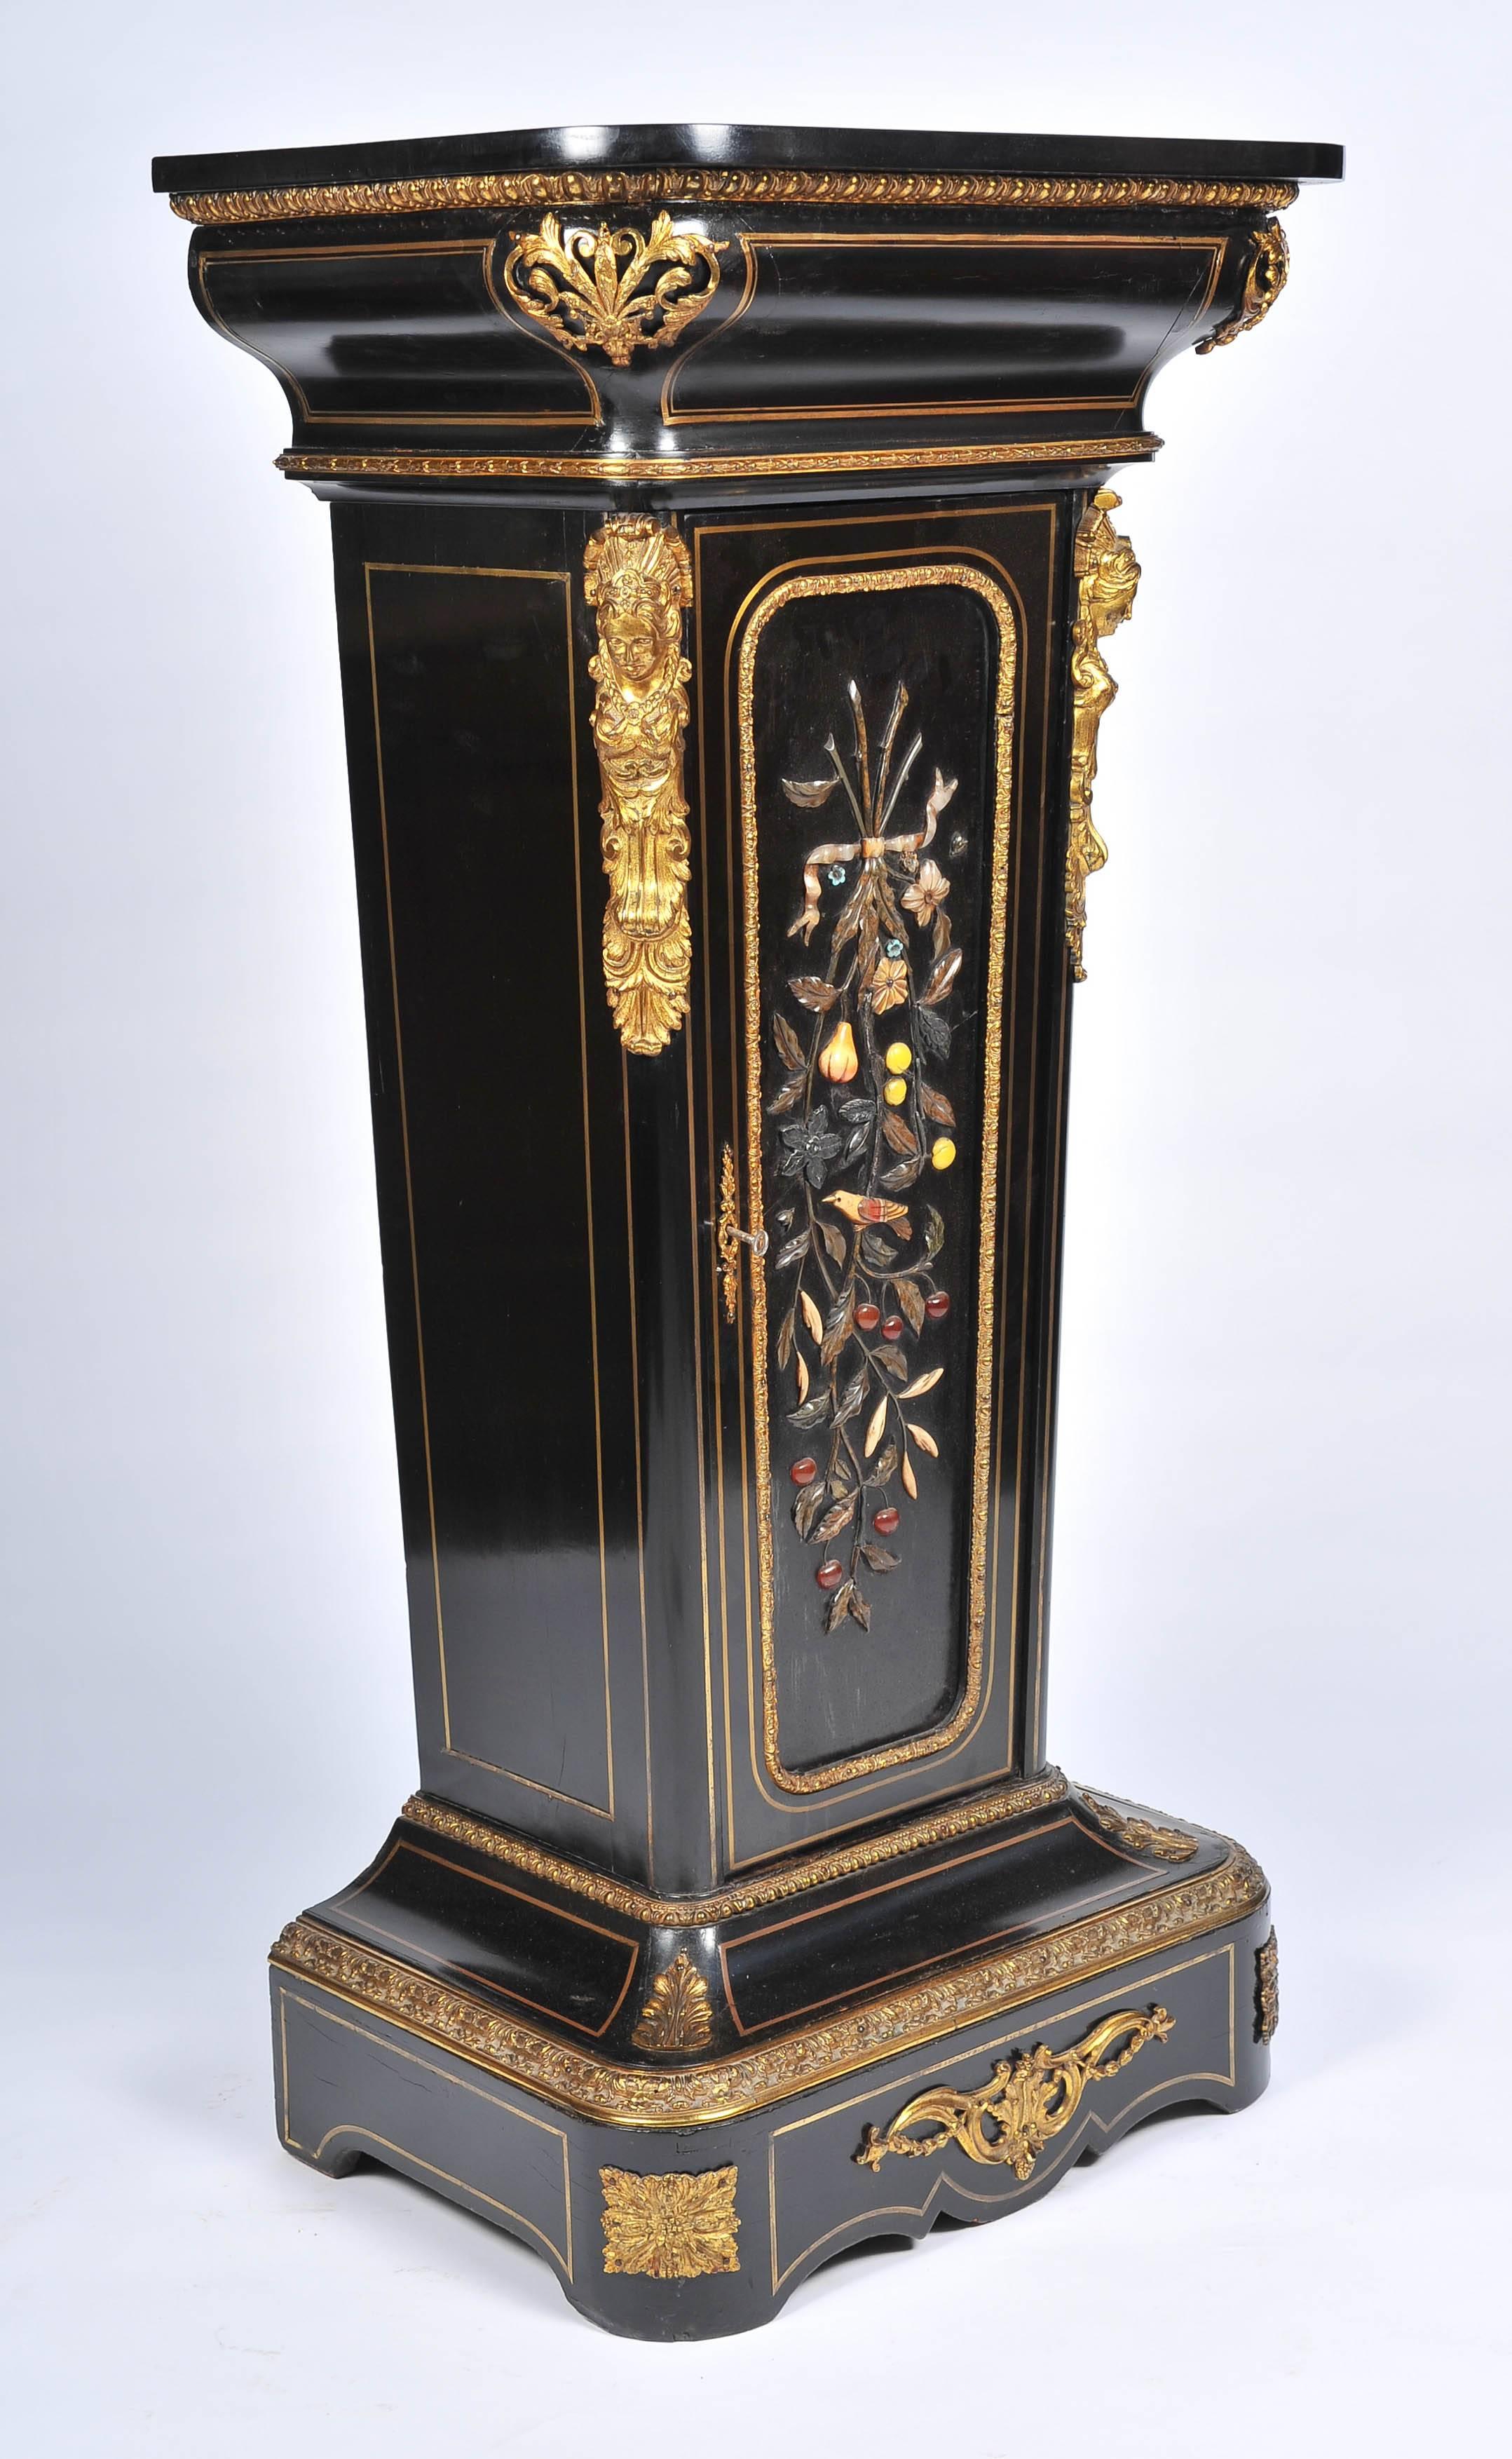 A very impressive 19th century French ebonized tapering pedestal. Having gilded ormolu mounts, brass inlay and a wonderful colored Pietra Dura inlaid panel to the hinged front door.